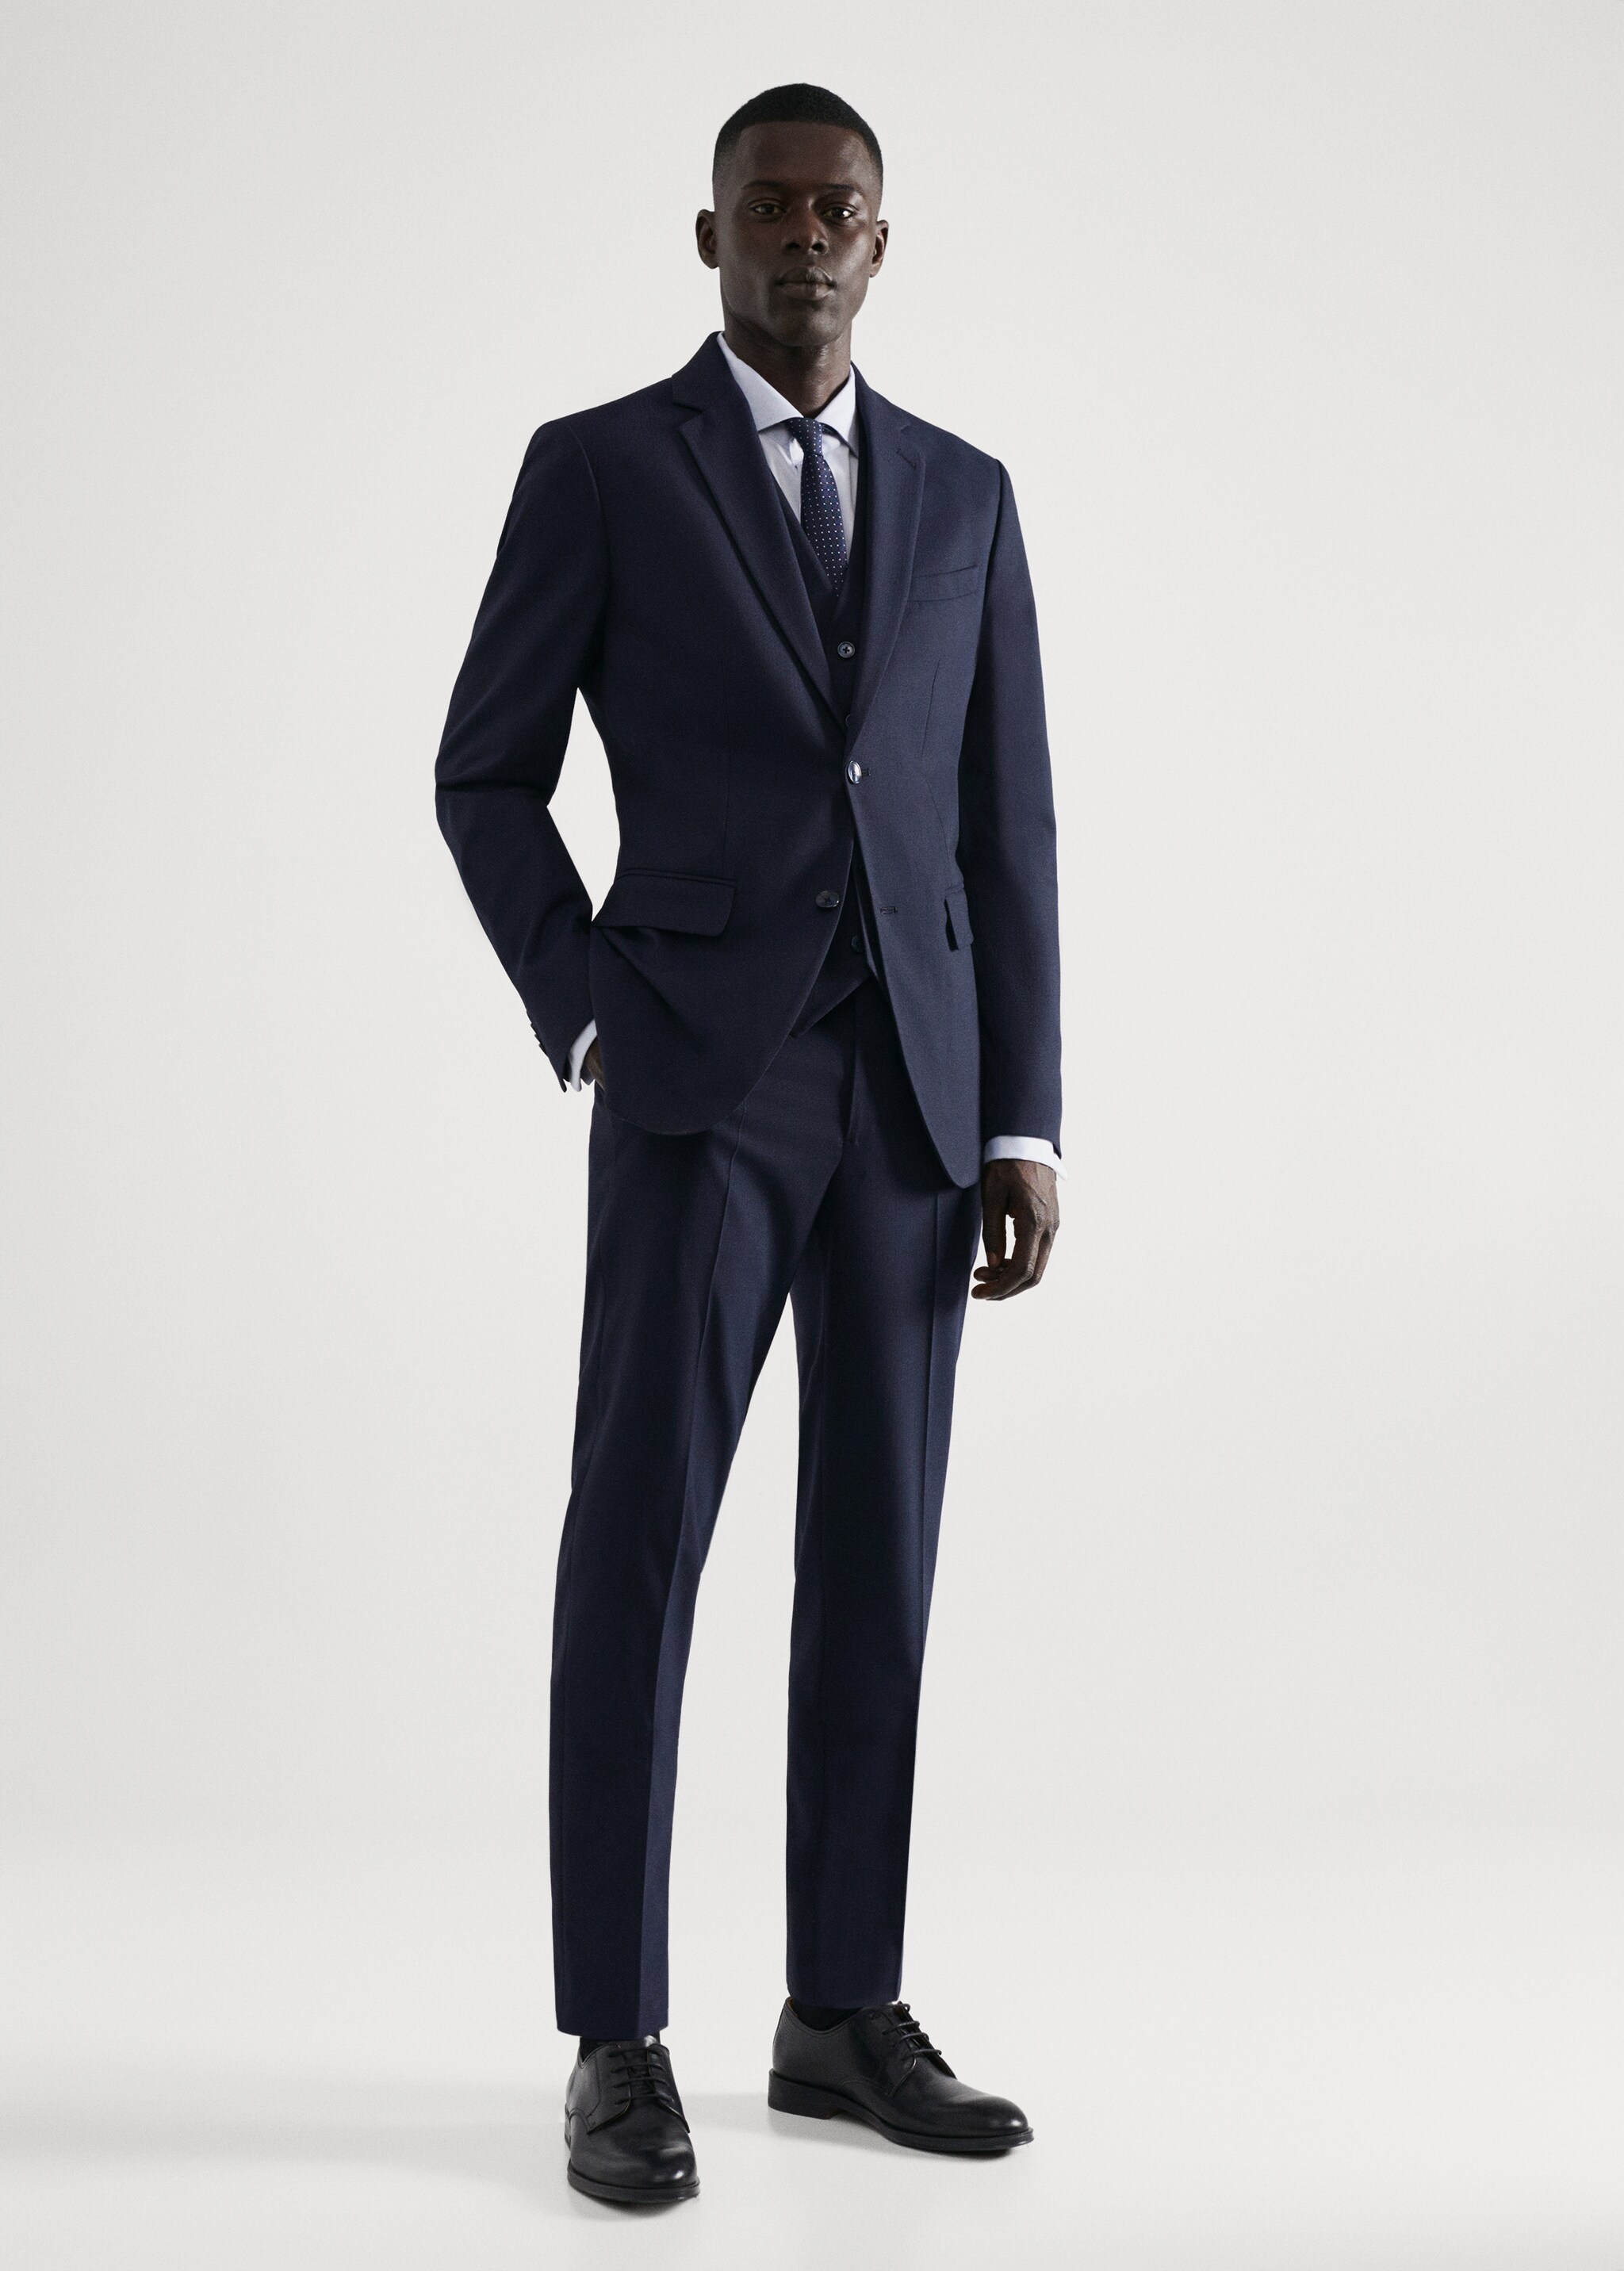 Stretch fabric slim-fit suit trousers - General plane